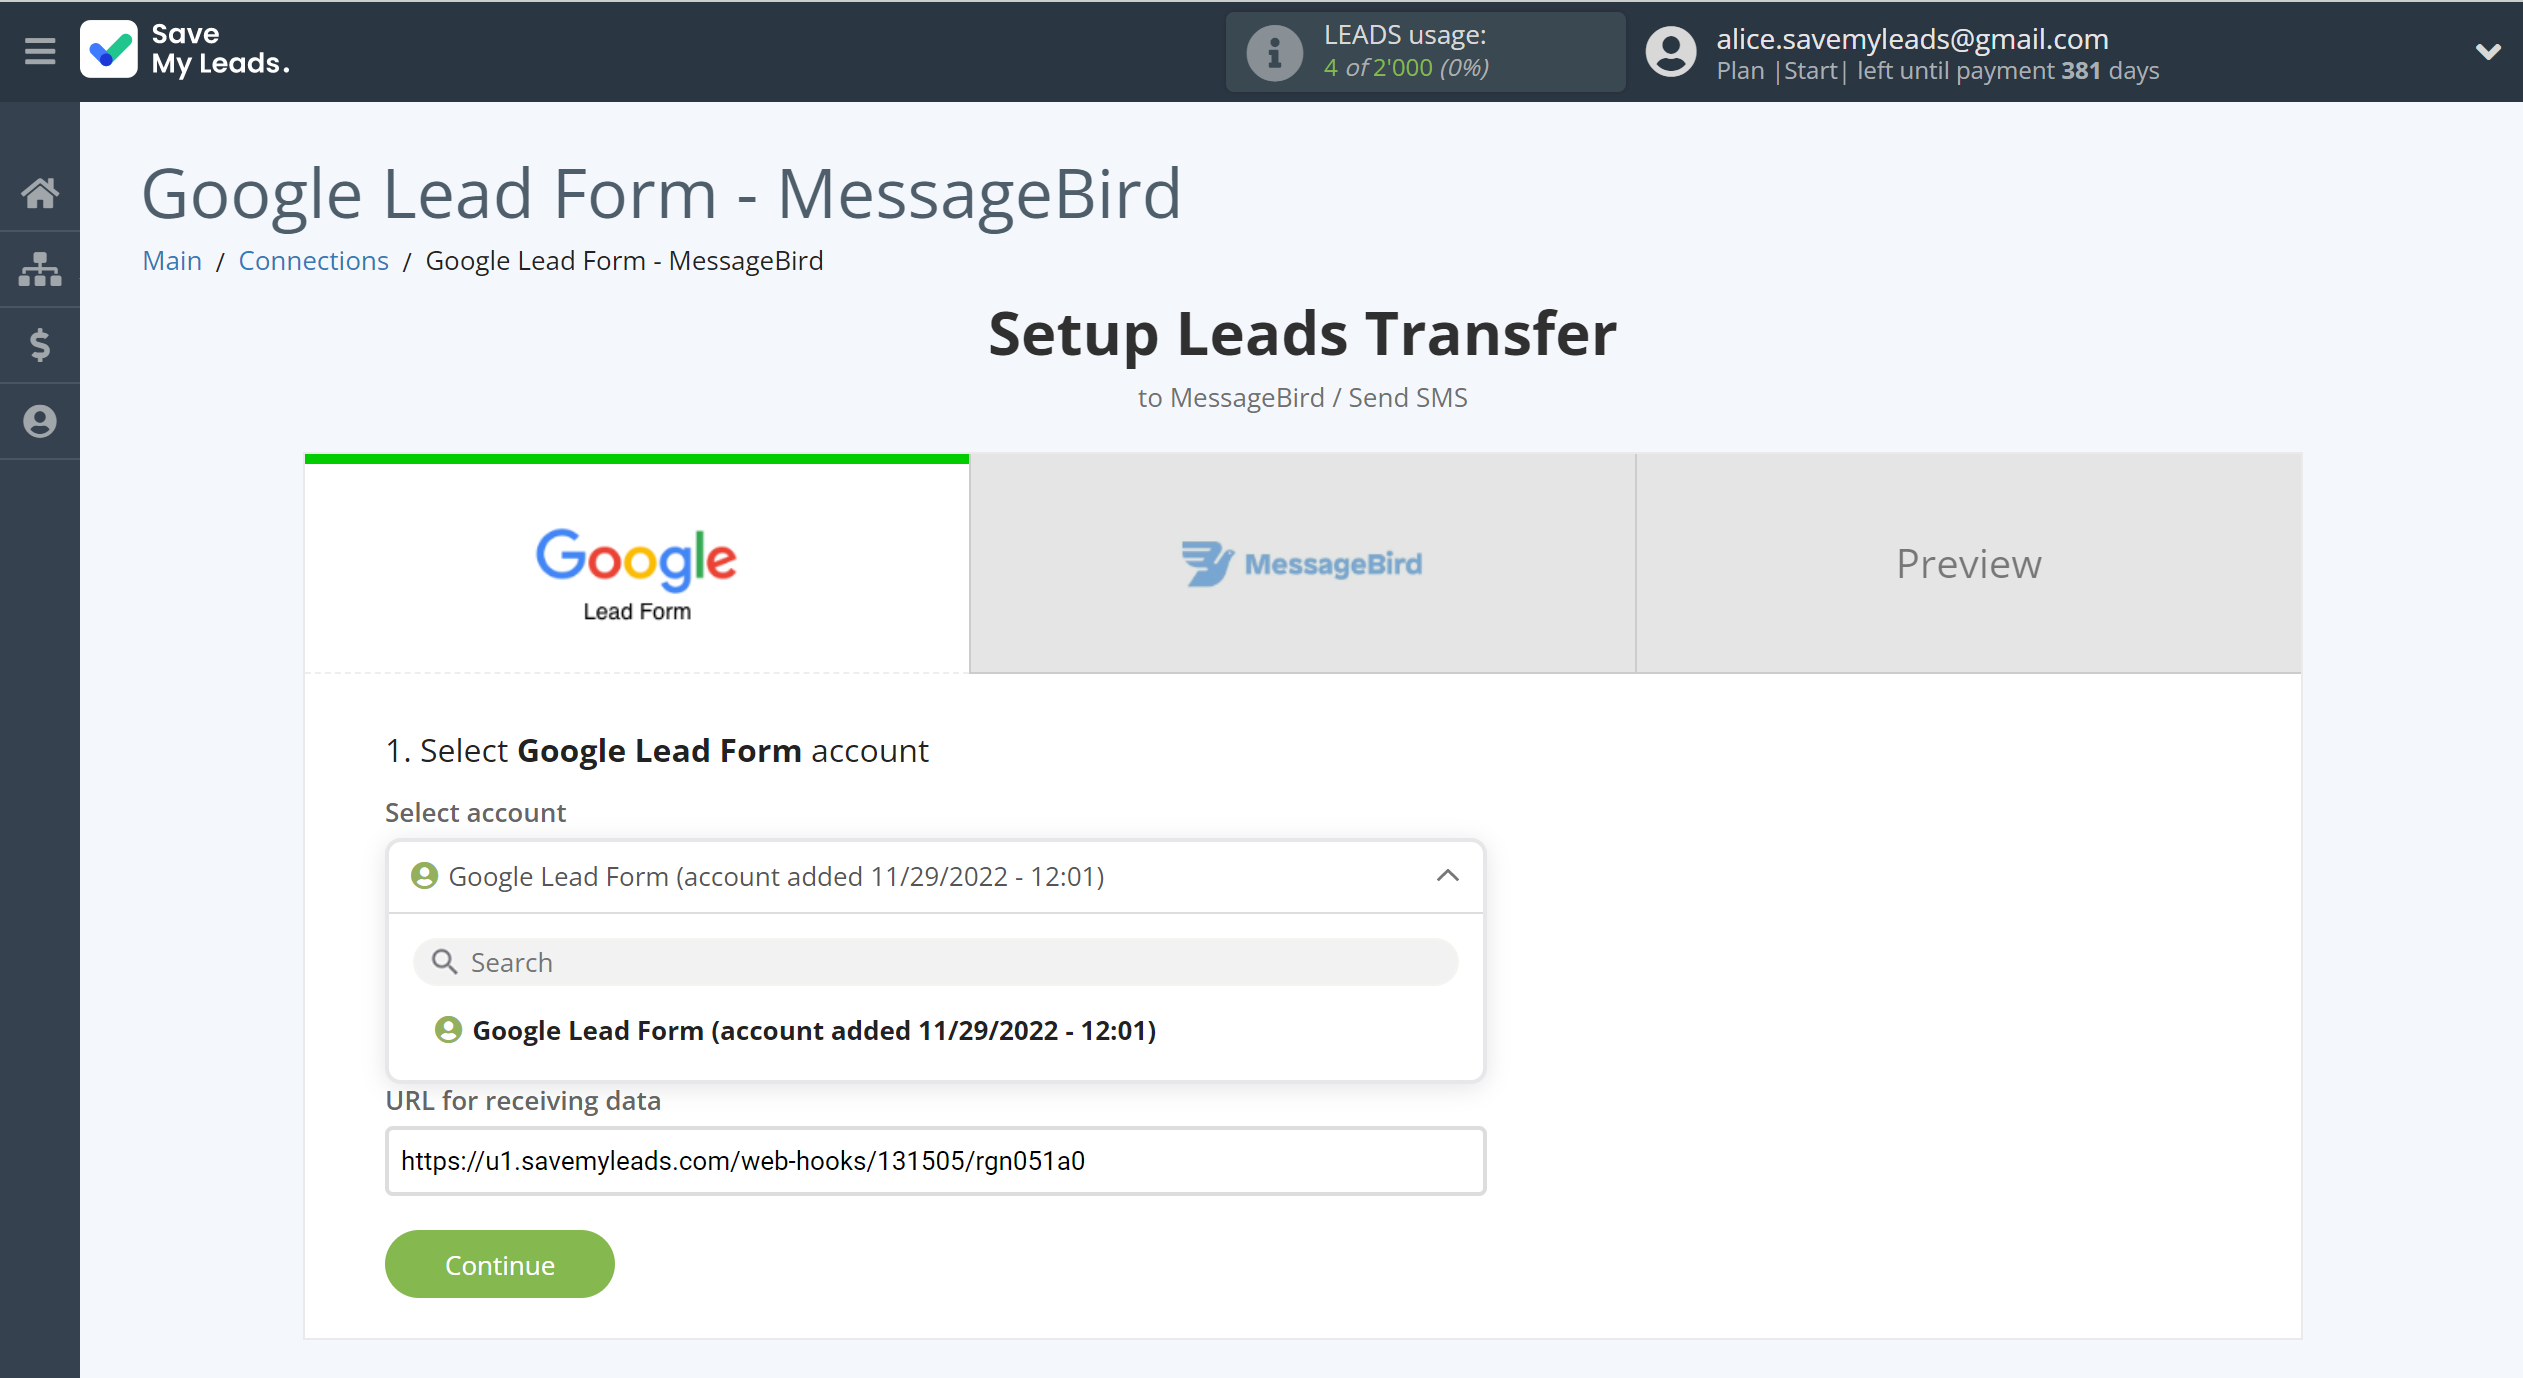 How to Connect Google Lead Form with MessageBird | Data Source account selection